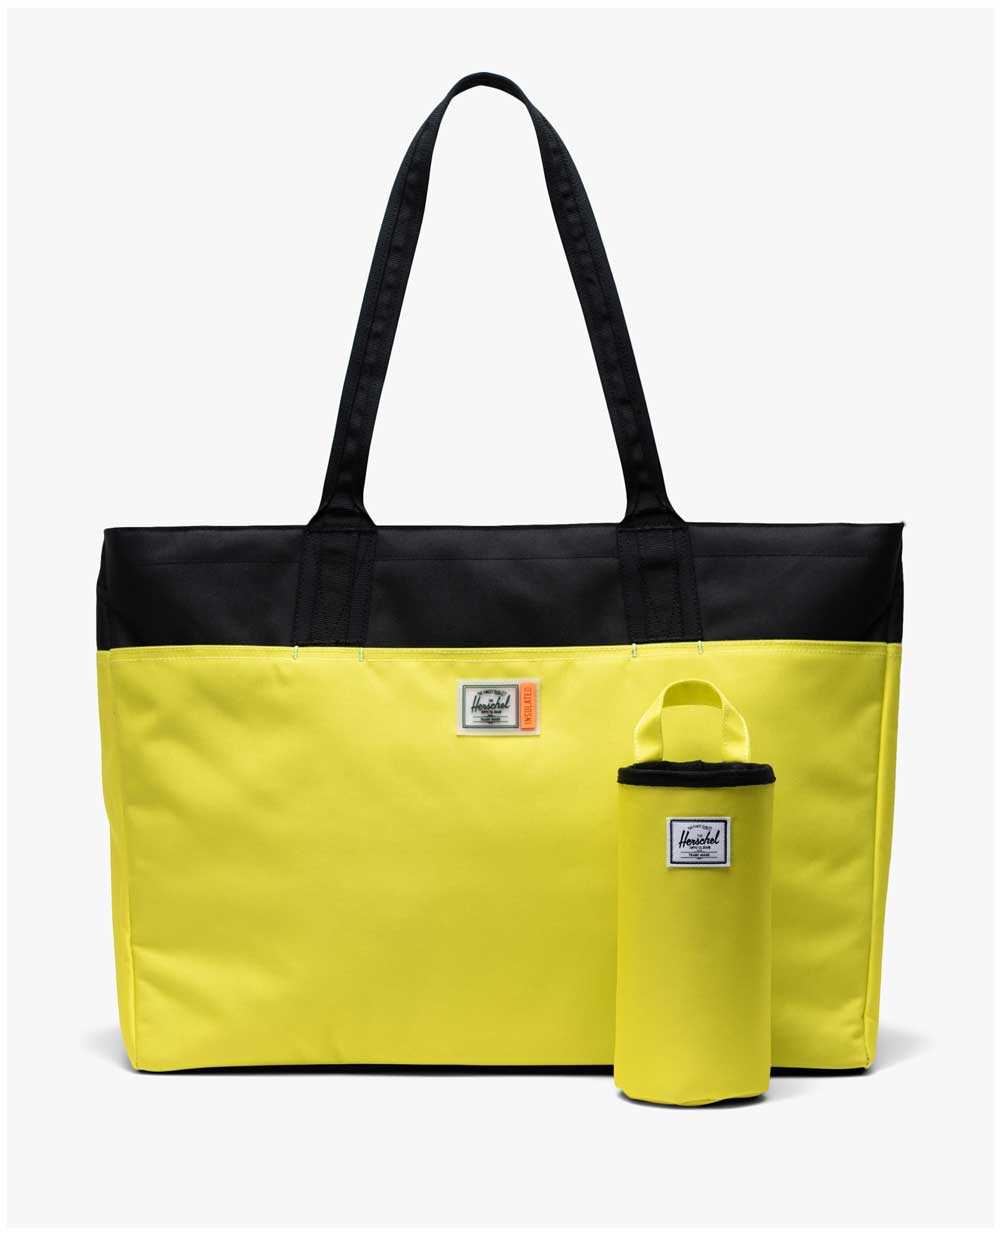 A link to the Insulated Totes section